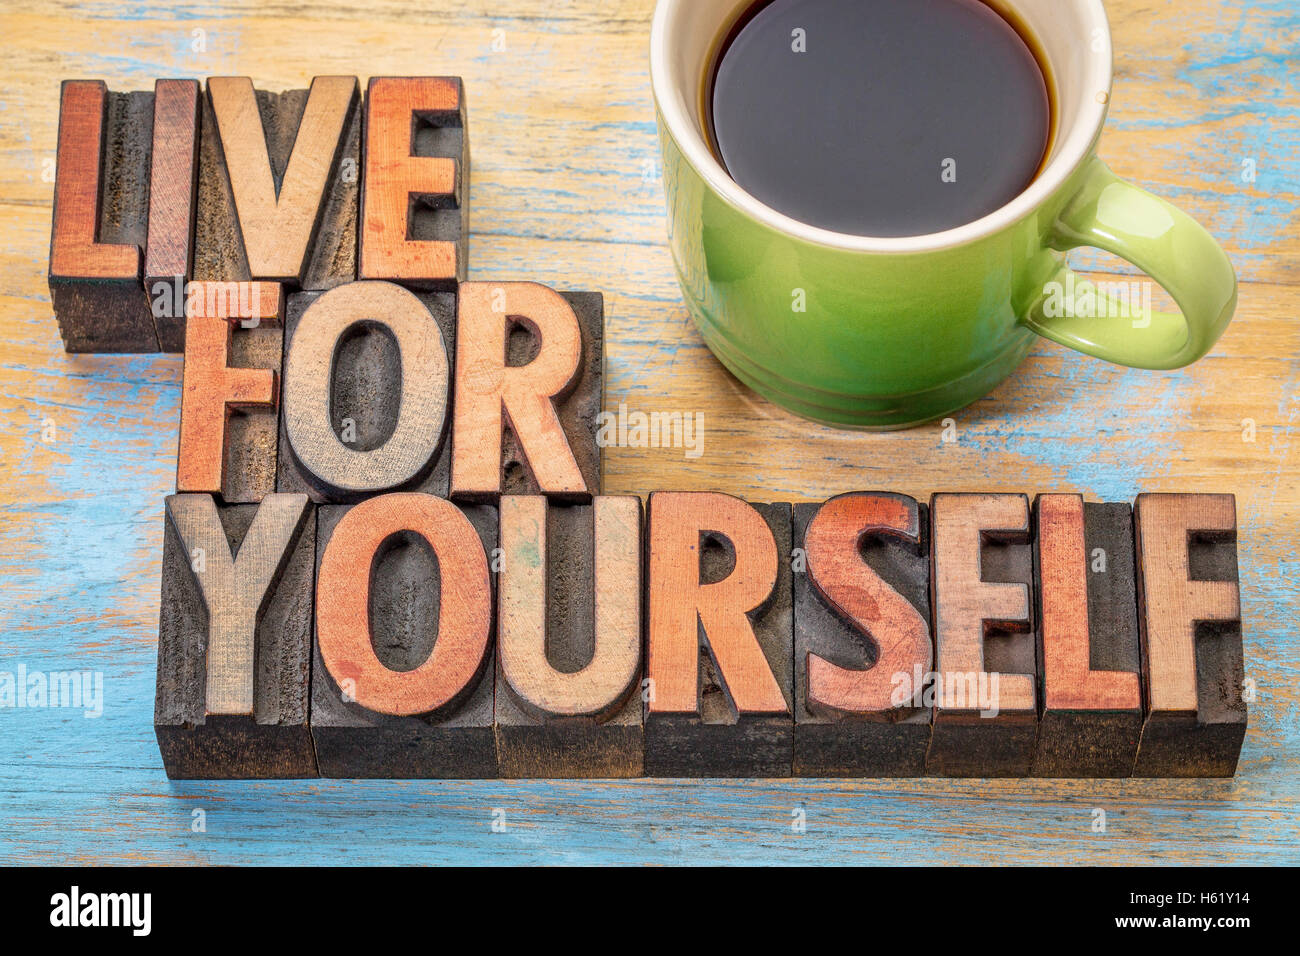 Live for yourself  - word abstract in vintage letterpress wood type with a cup of coffee Stock Photo